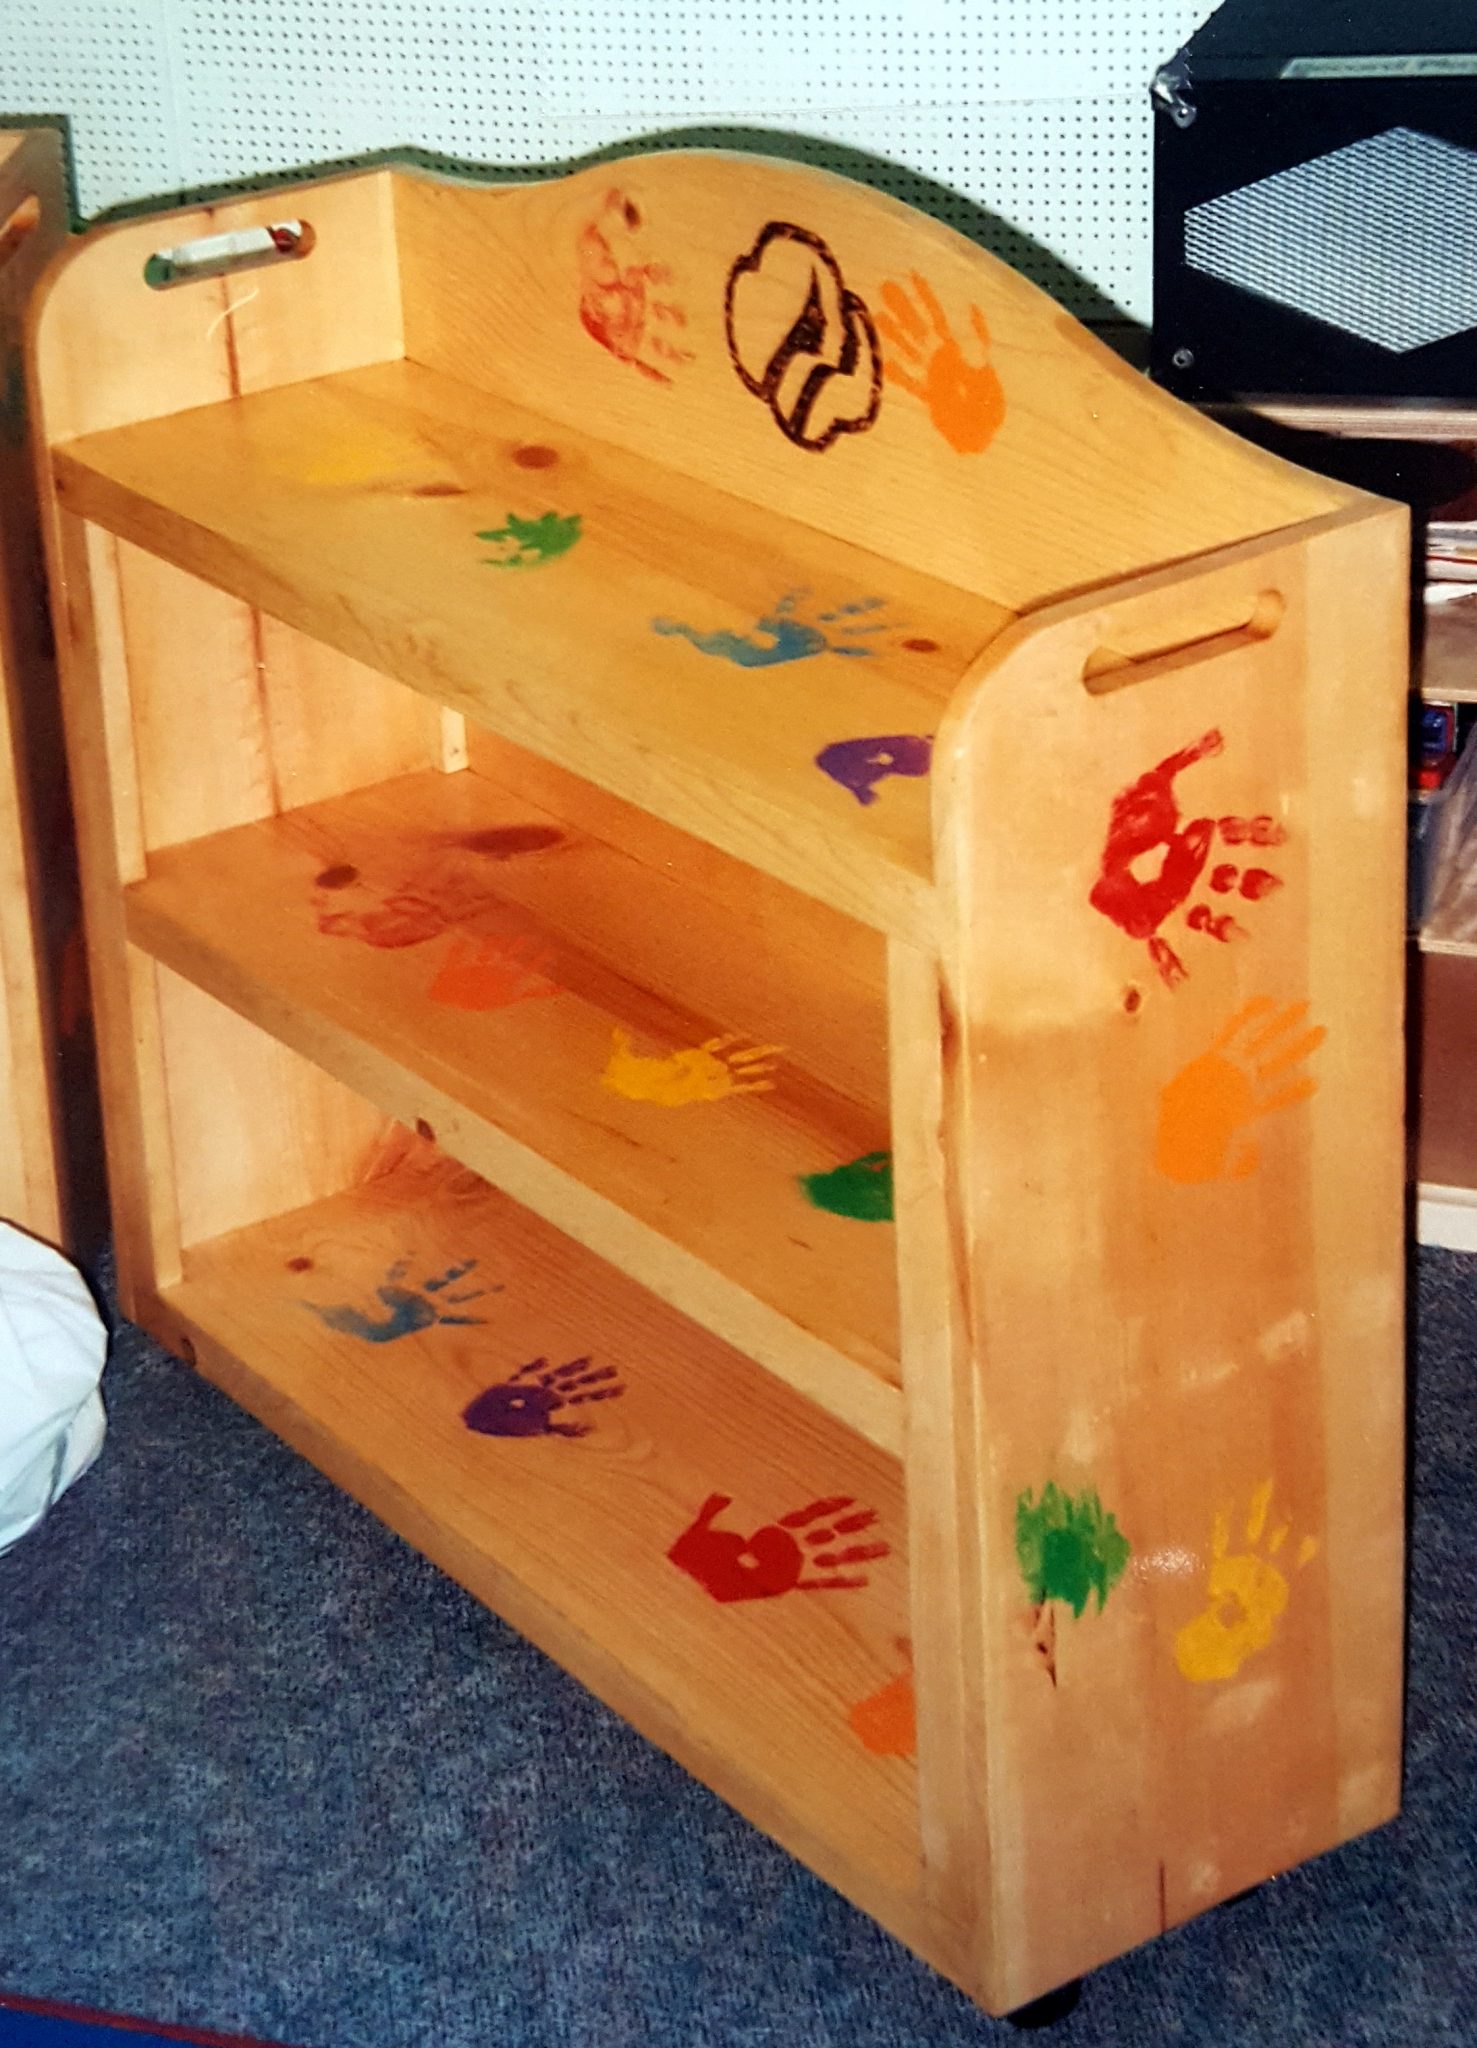 Simple shelf units for the storage of toys.  Made for The Center For Battered Women, Rochester NY. 
A project of the Henrietta Girl Scout Troup.  